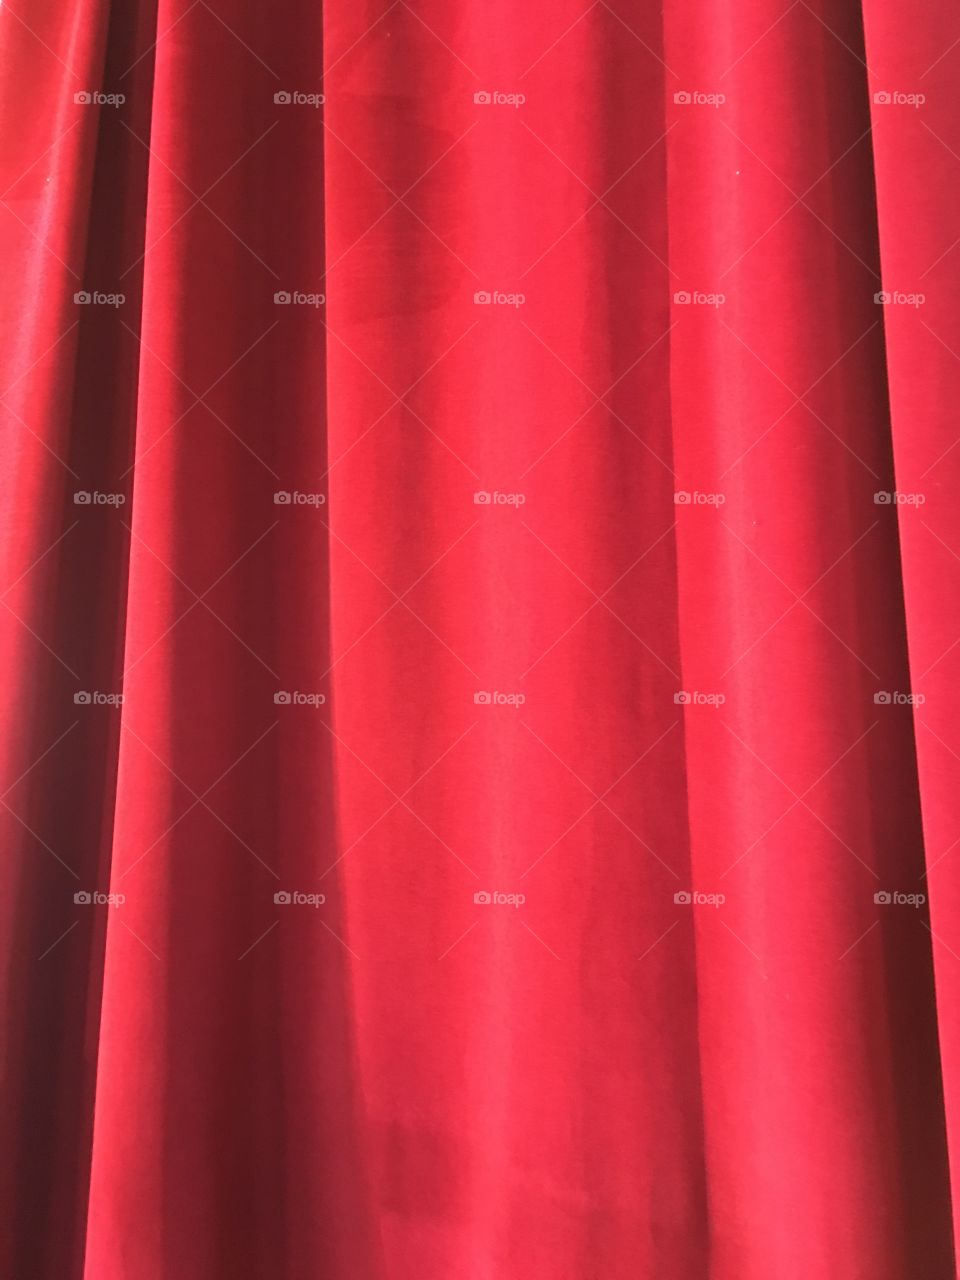 Close-up of red curtain